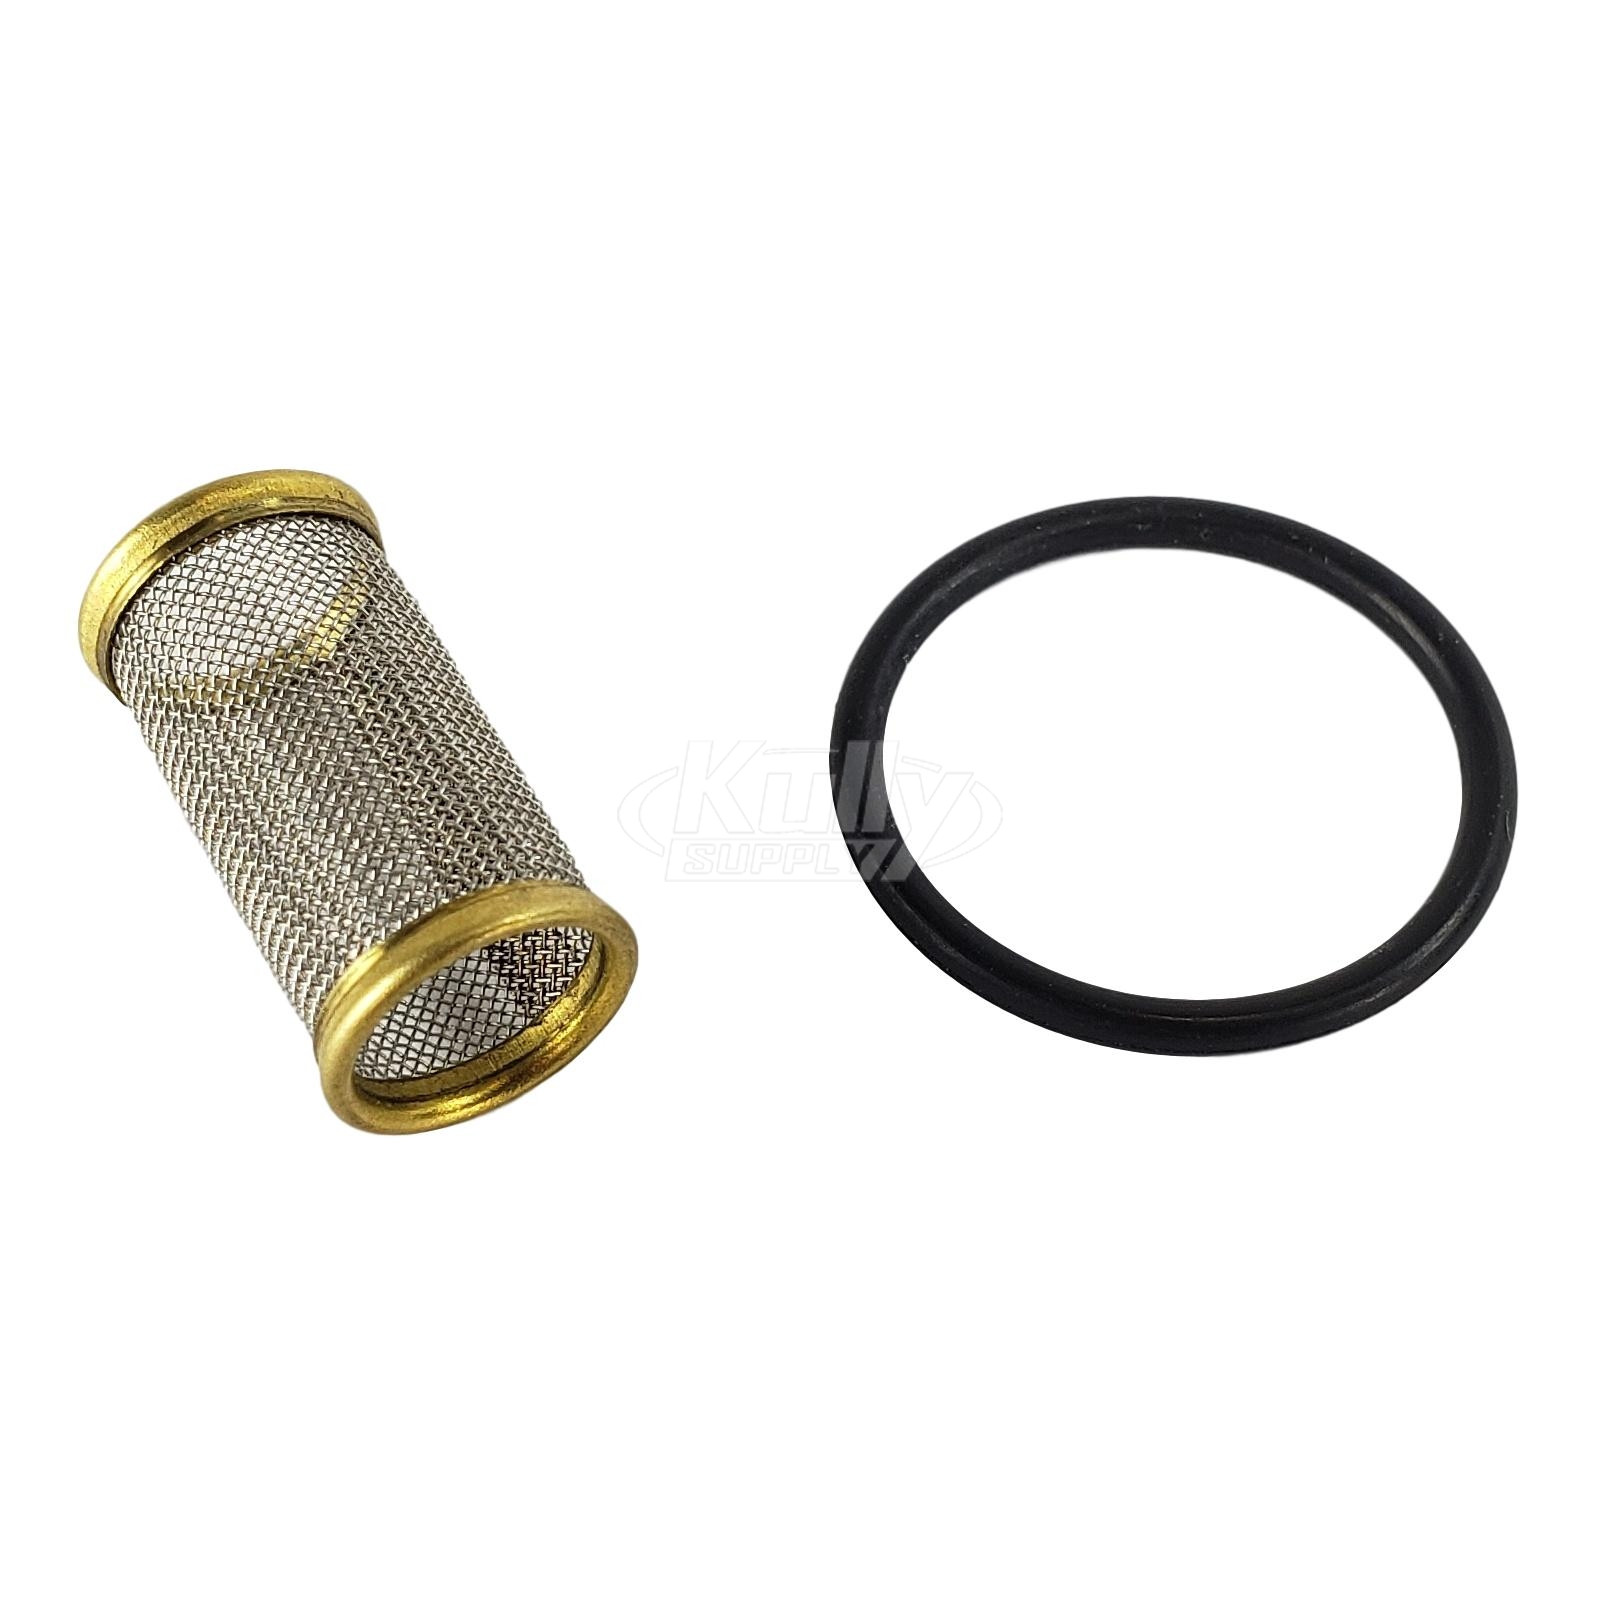 Zurn P6900-121 Filter Screen Replacement Kit (for Z6901, Z6902, and Z6903)